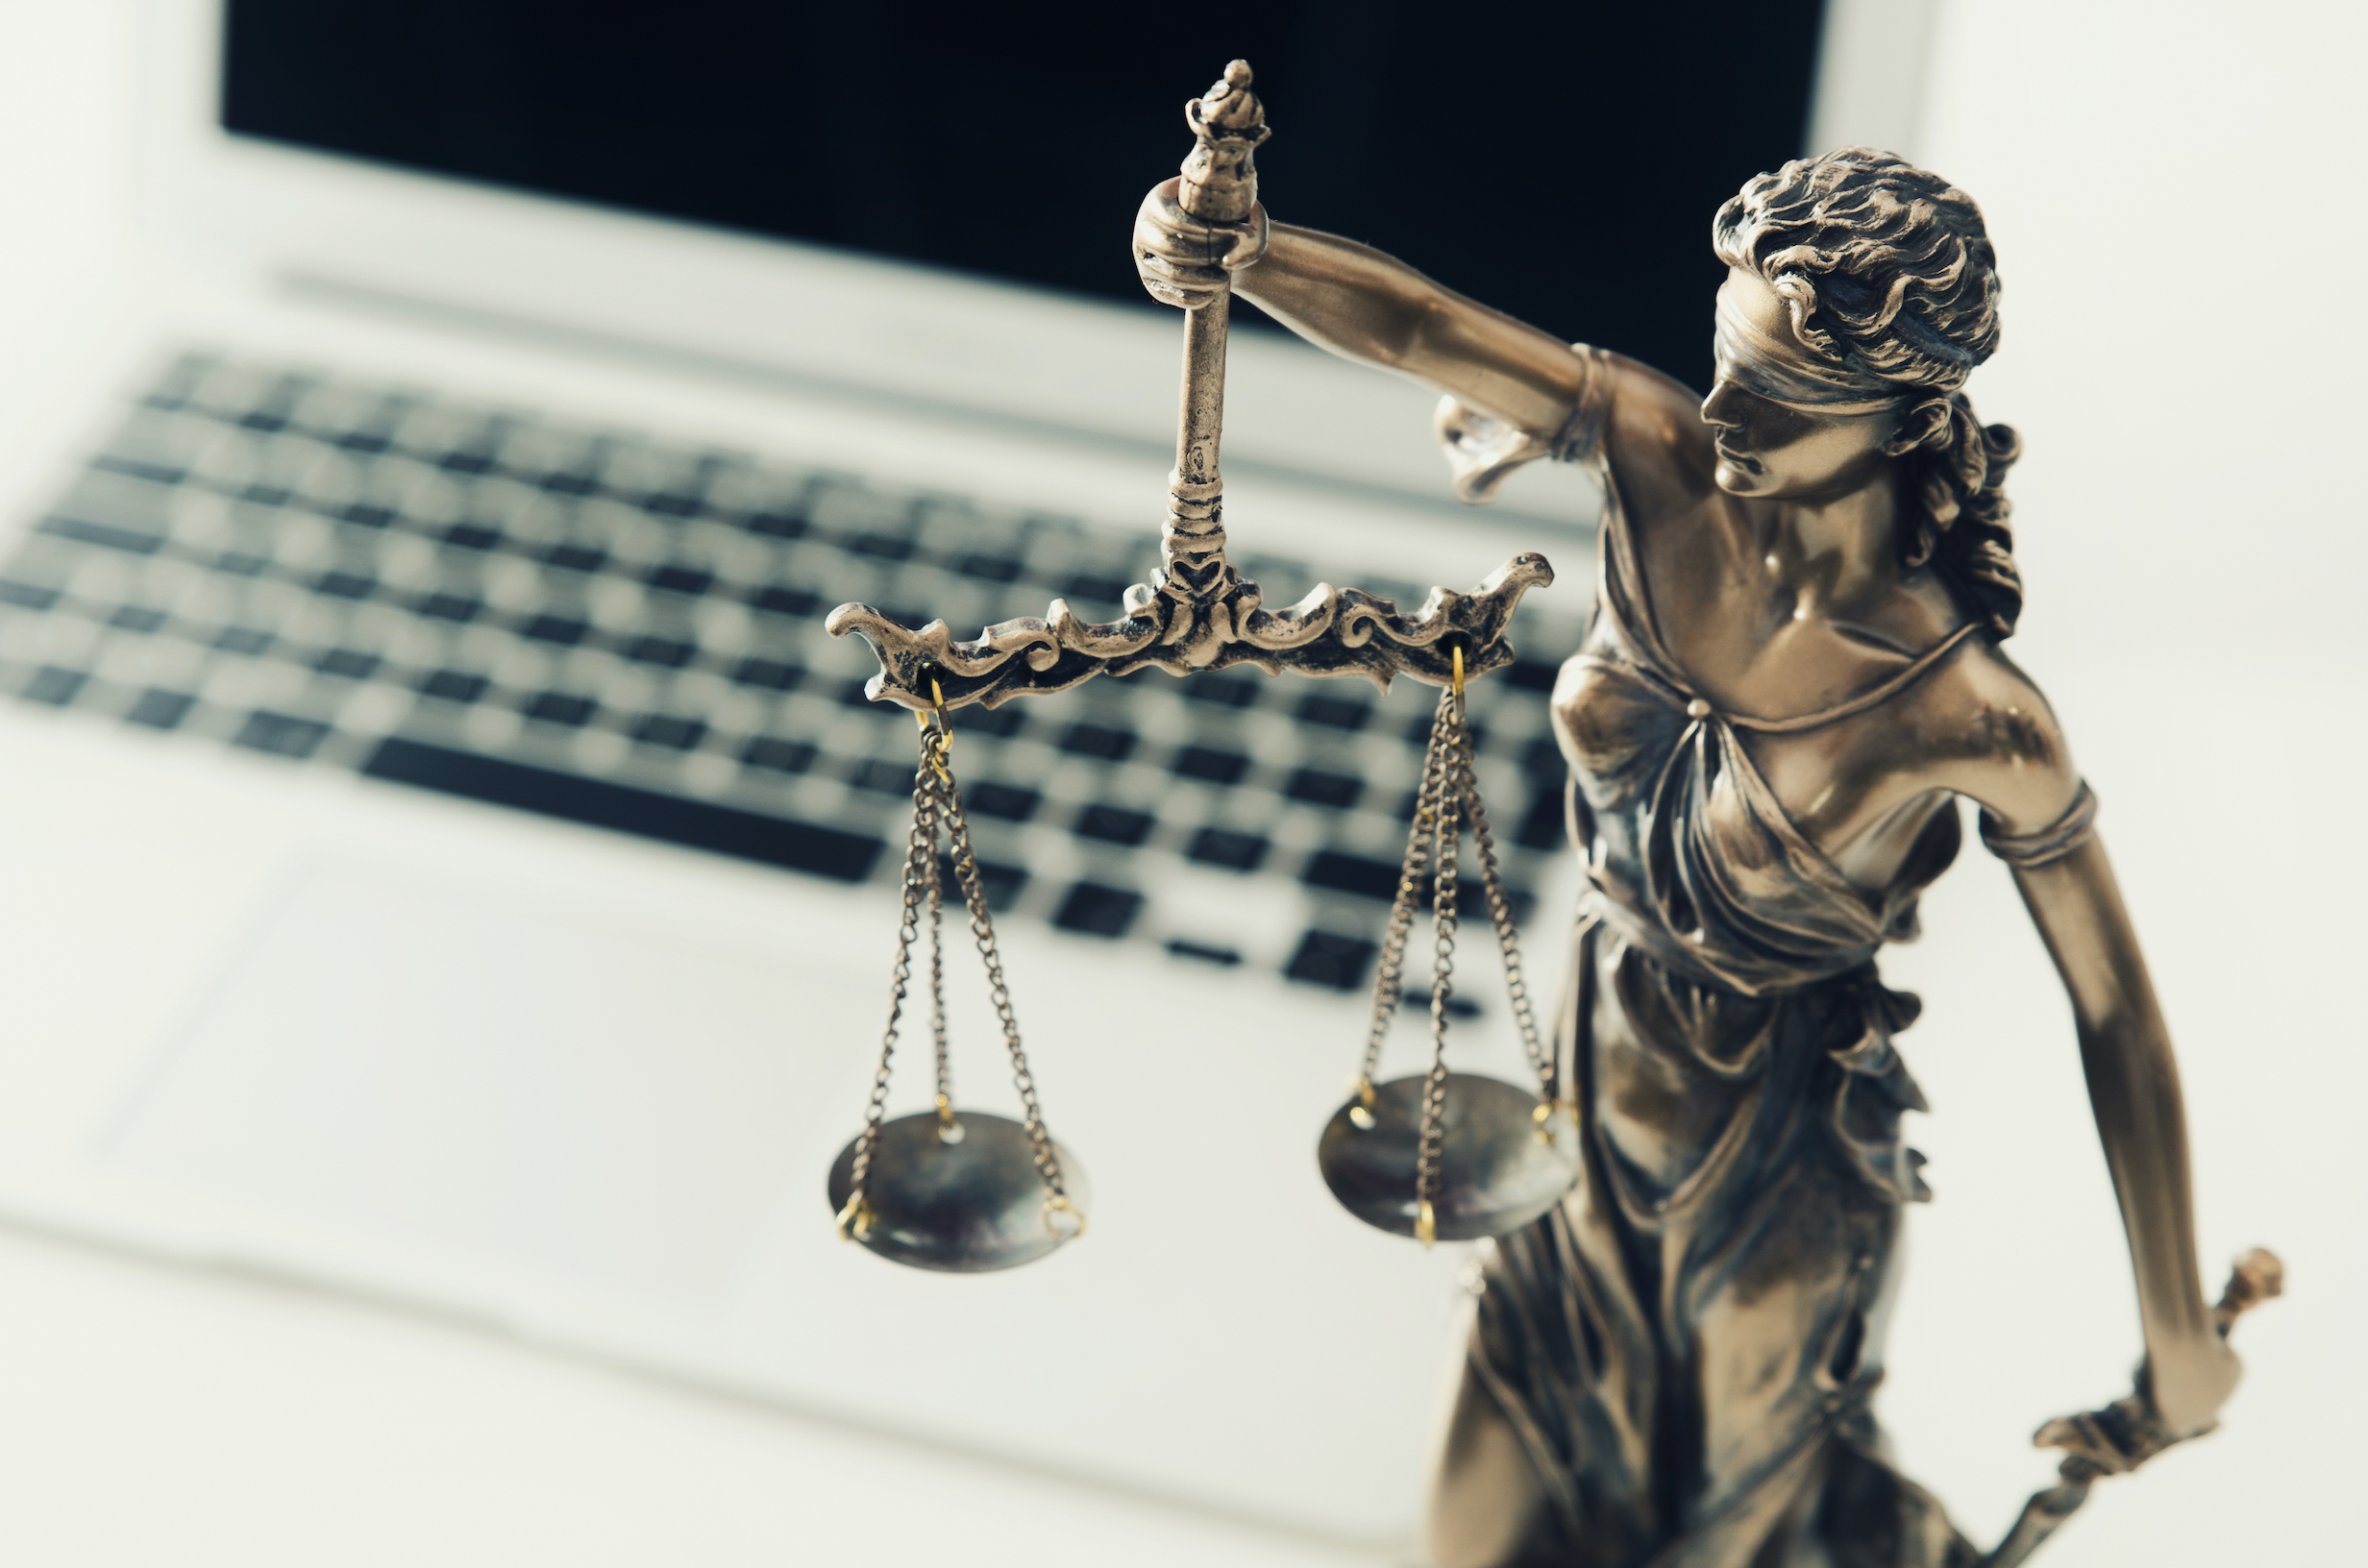 The Future of Law: Automation or Augmentation?